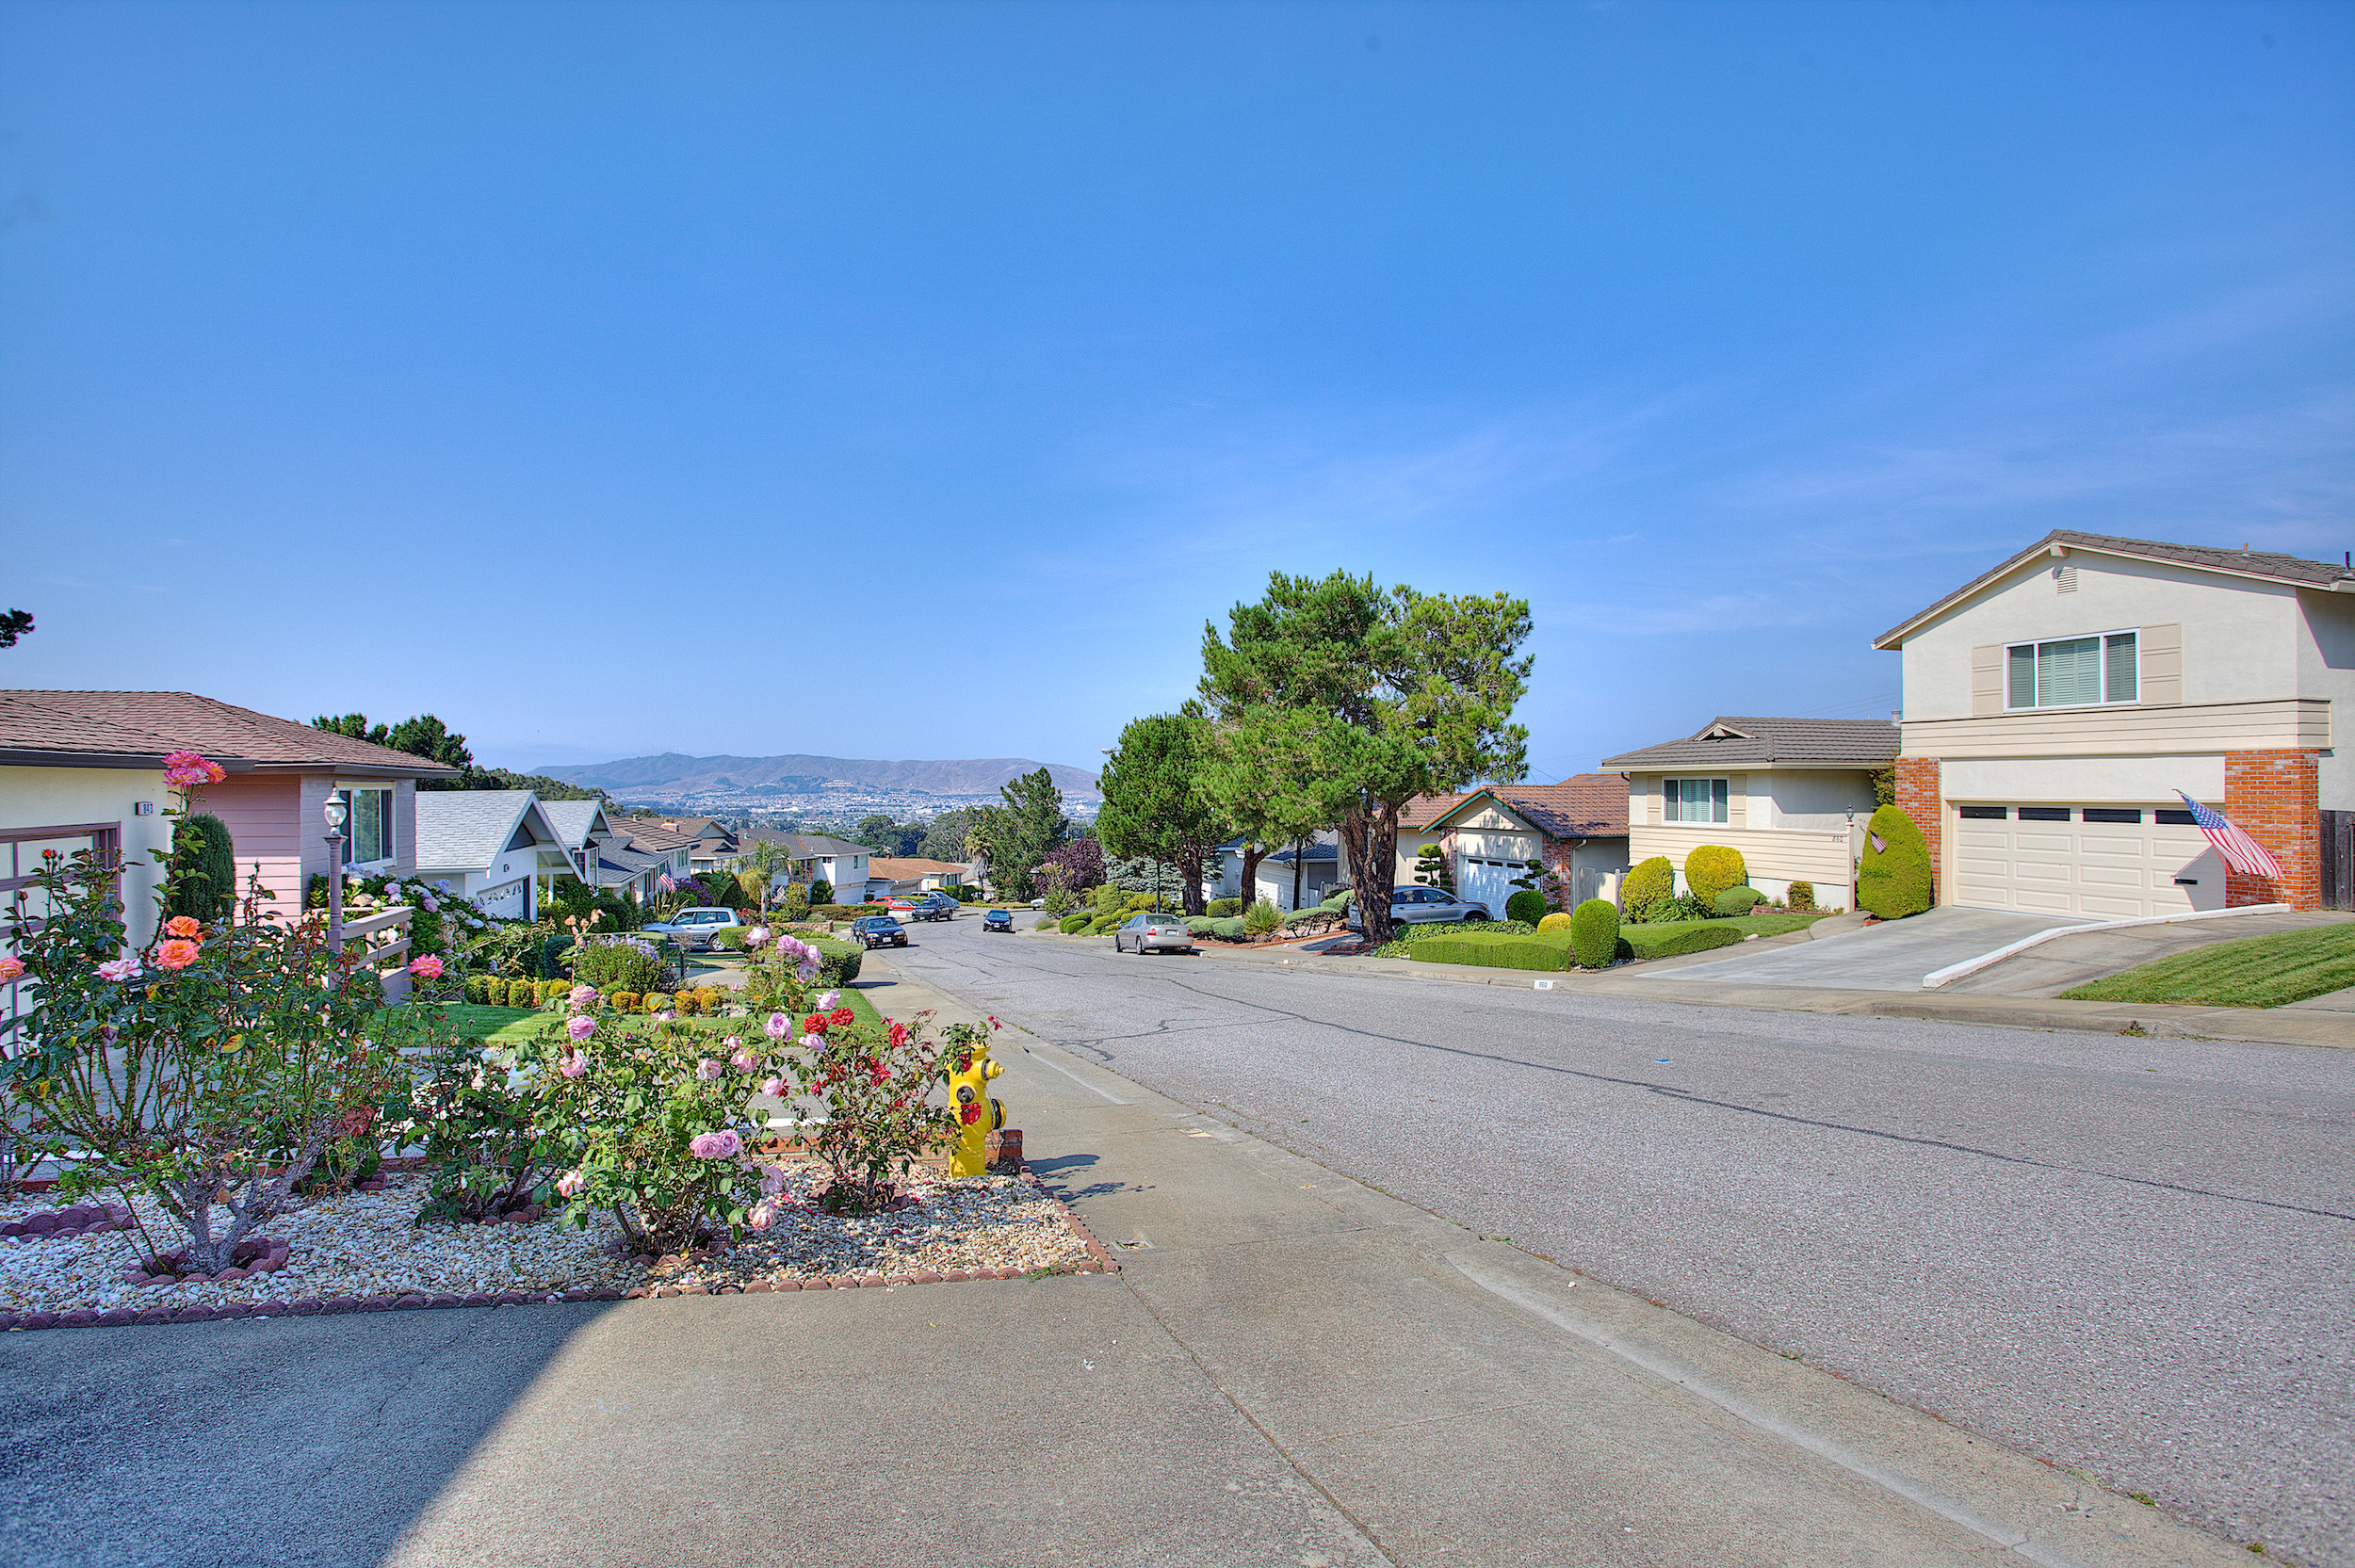 Glenview Highlands Millbrae front yard flowers and rocks as ground cover